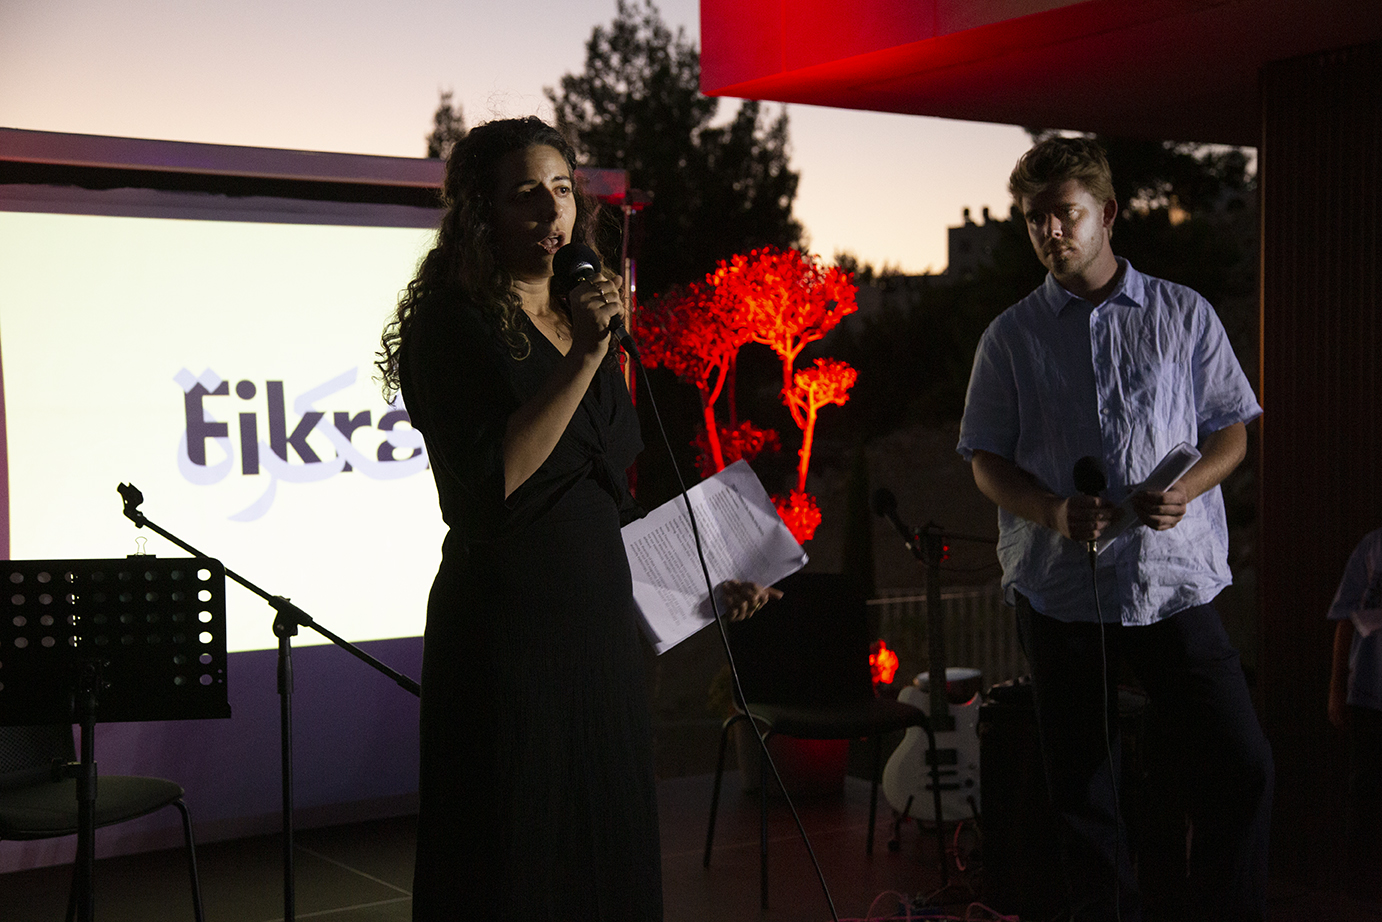 Aisha Hamed speaking at the launch event of Fikra Magazine at the Qattan Foundation, Ramallah, West Bank, August 2, 2023. (Courtesy of Fikra)